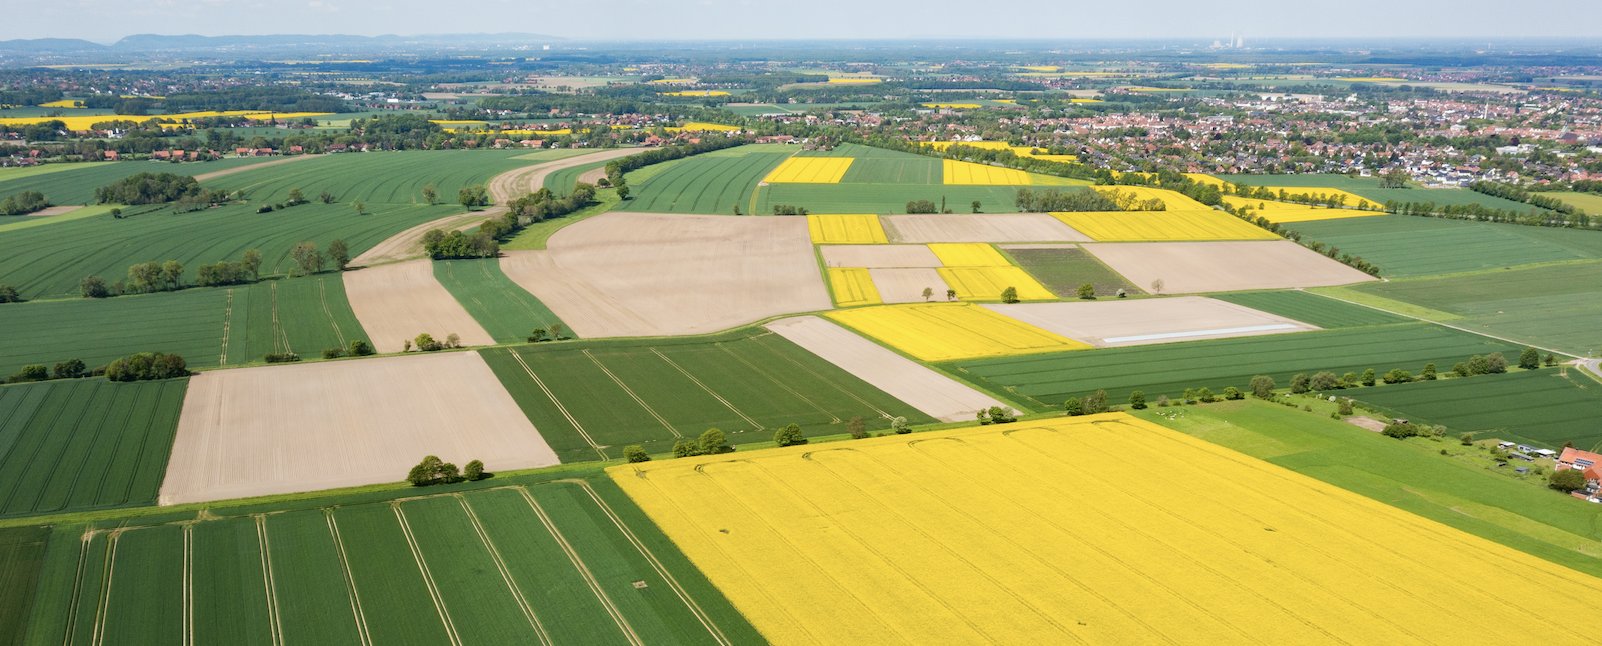 Upcoming Horizon Europe AgriFood funding opportunities - aerial view of a field of sunflowers and rapeseed